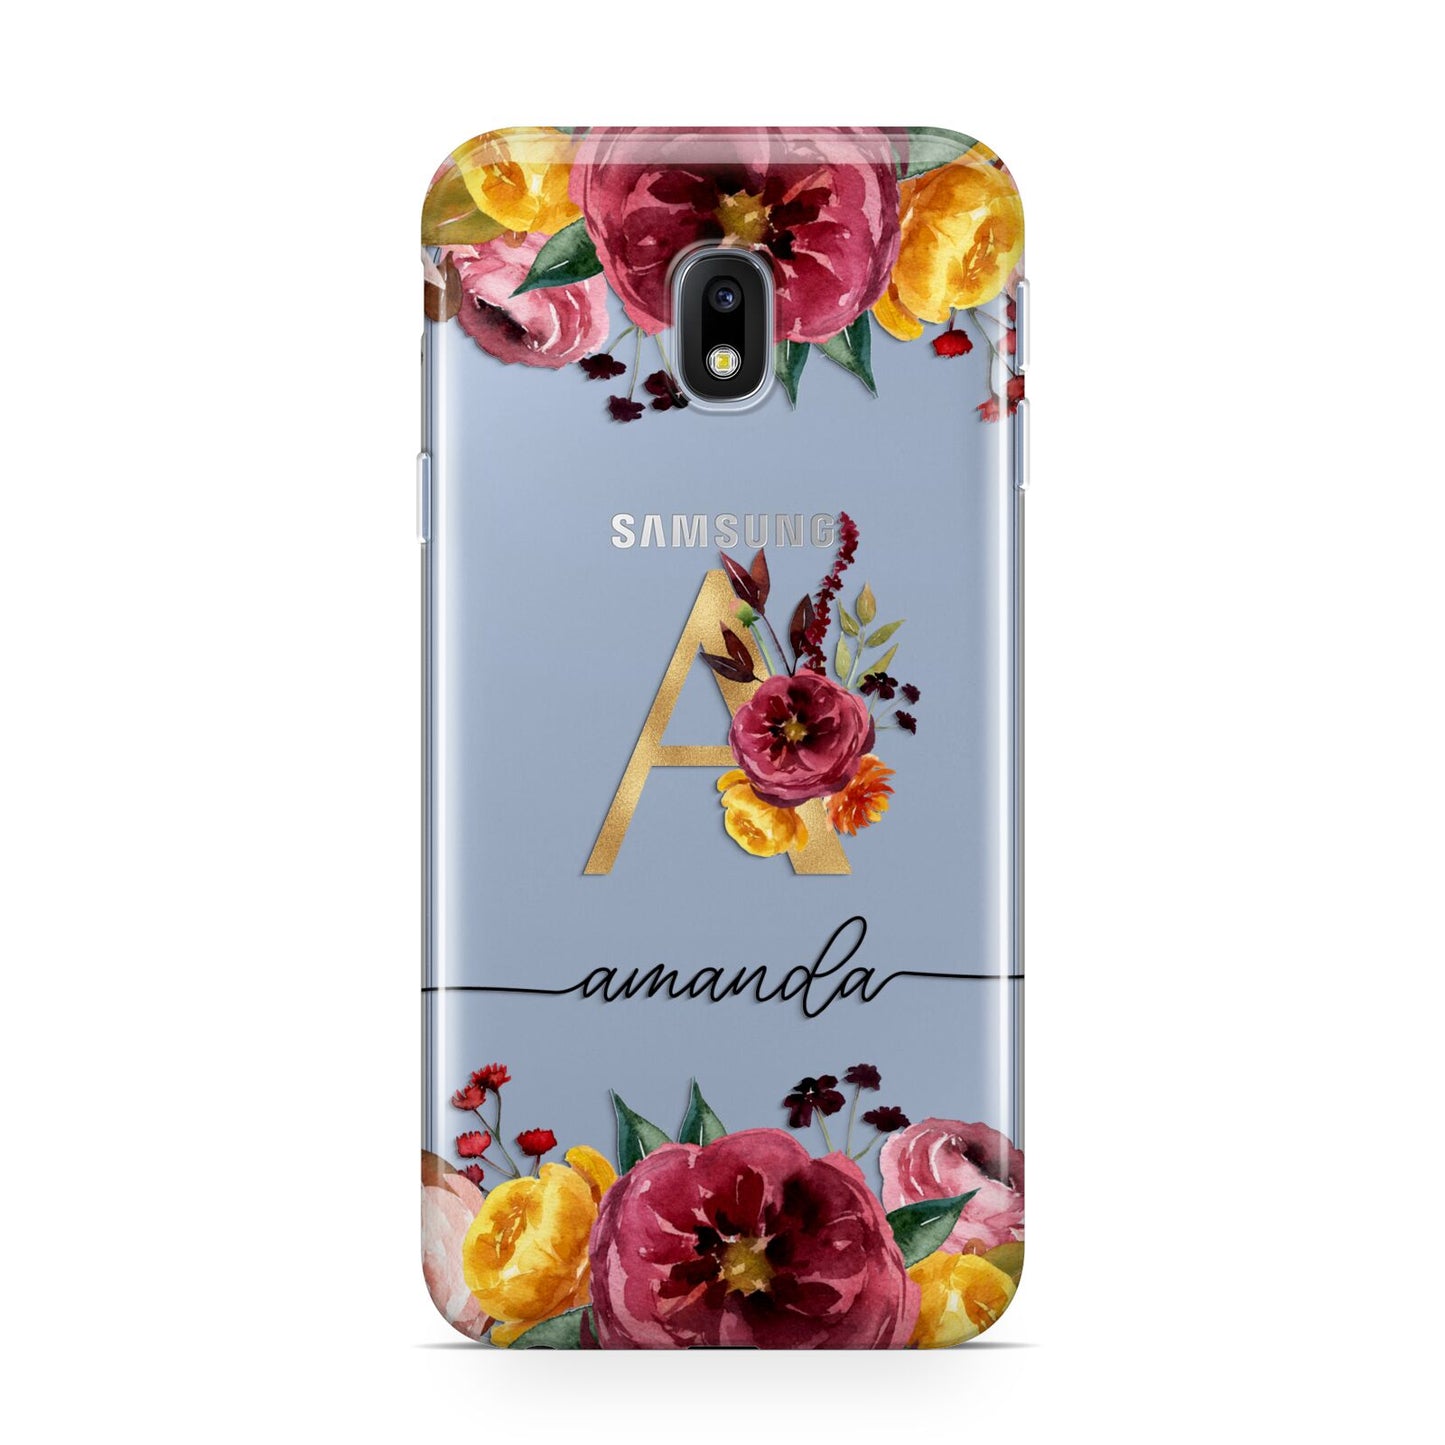 Autumn Watercolour Flowers with Initial Samsung Galaxy J3 2017 Case